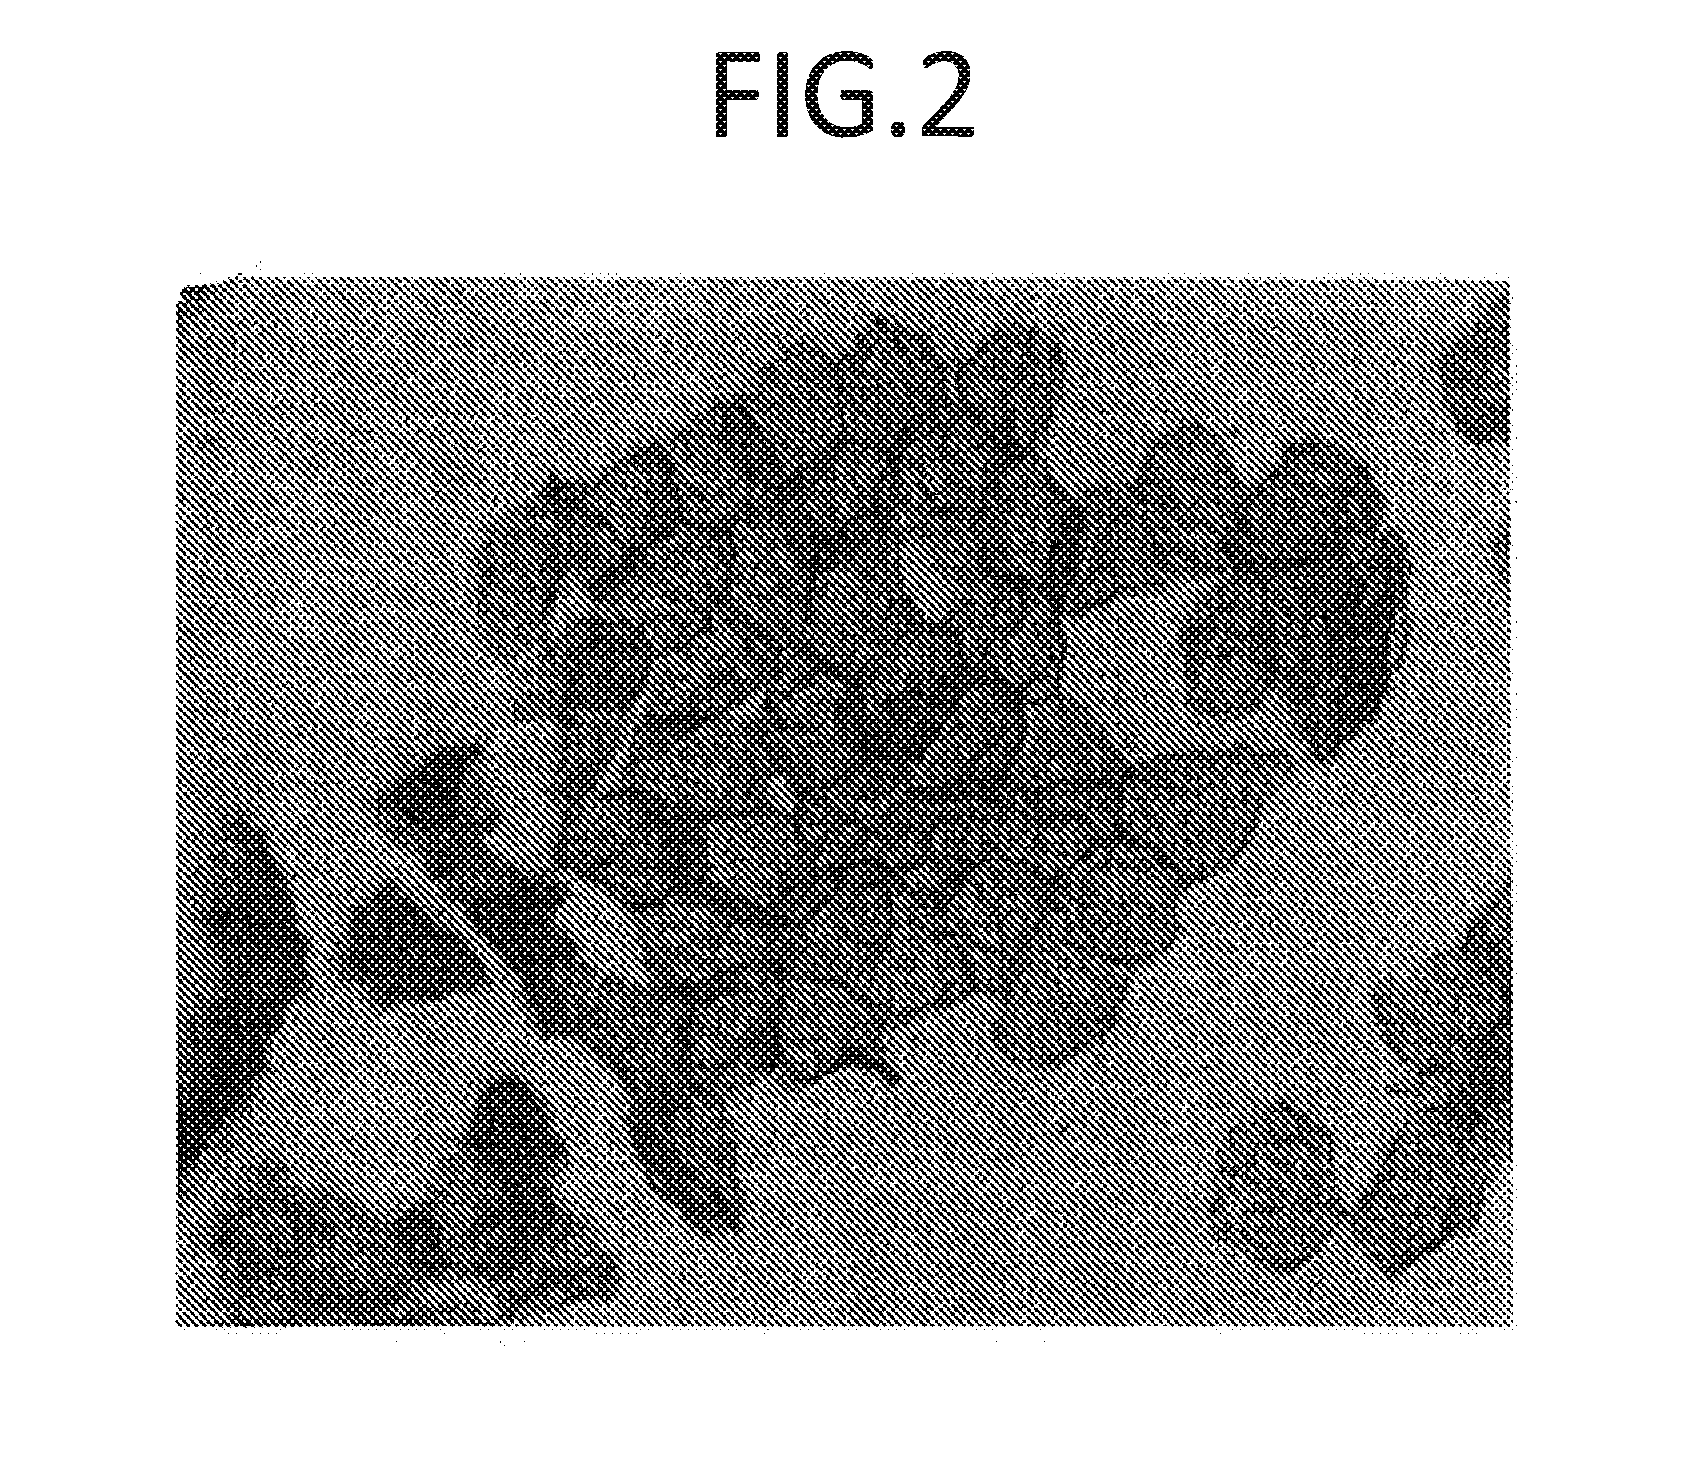 Method of supporting the differentiation of corneocytes